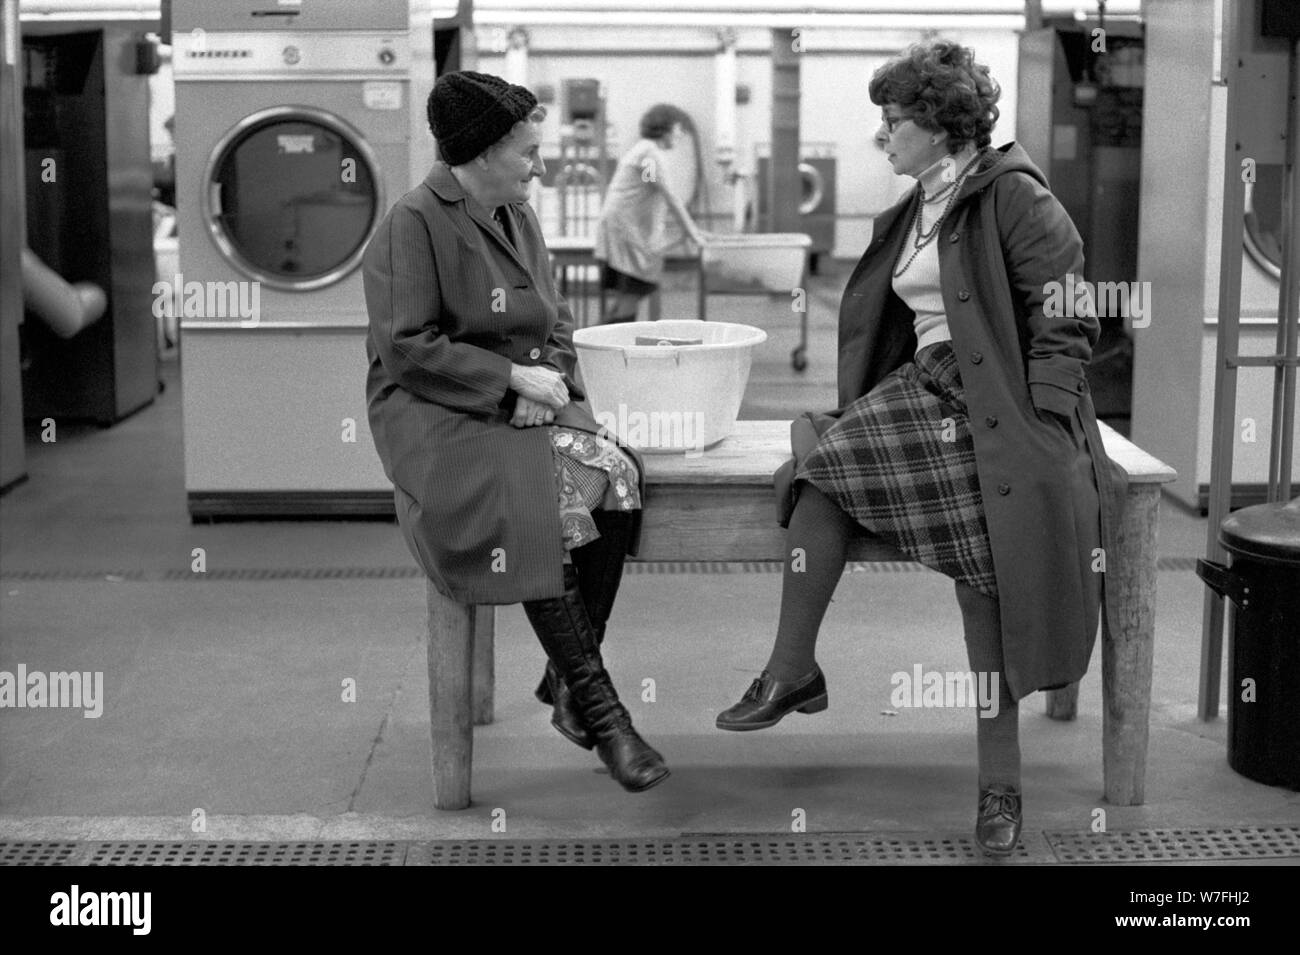 Public Laundry 1970s UK. Women taking their dirty used clothes to a public laundry to get them washed. Woman chatting with friend while waiting for their clothes washing to finish. Battersea south London 1979 70s England HOMER SYKES Stock Photo